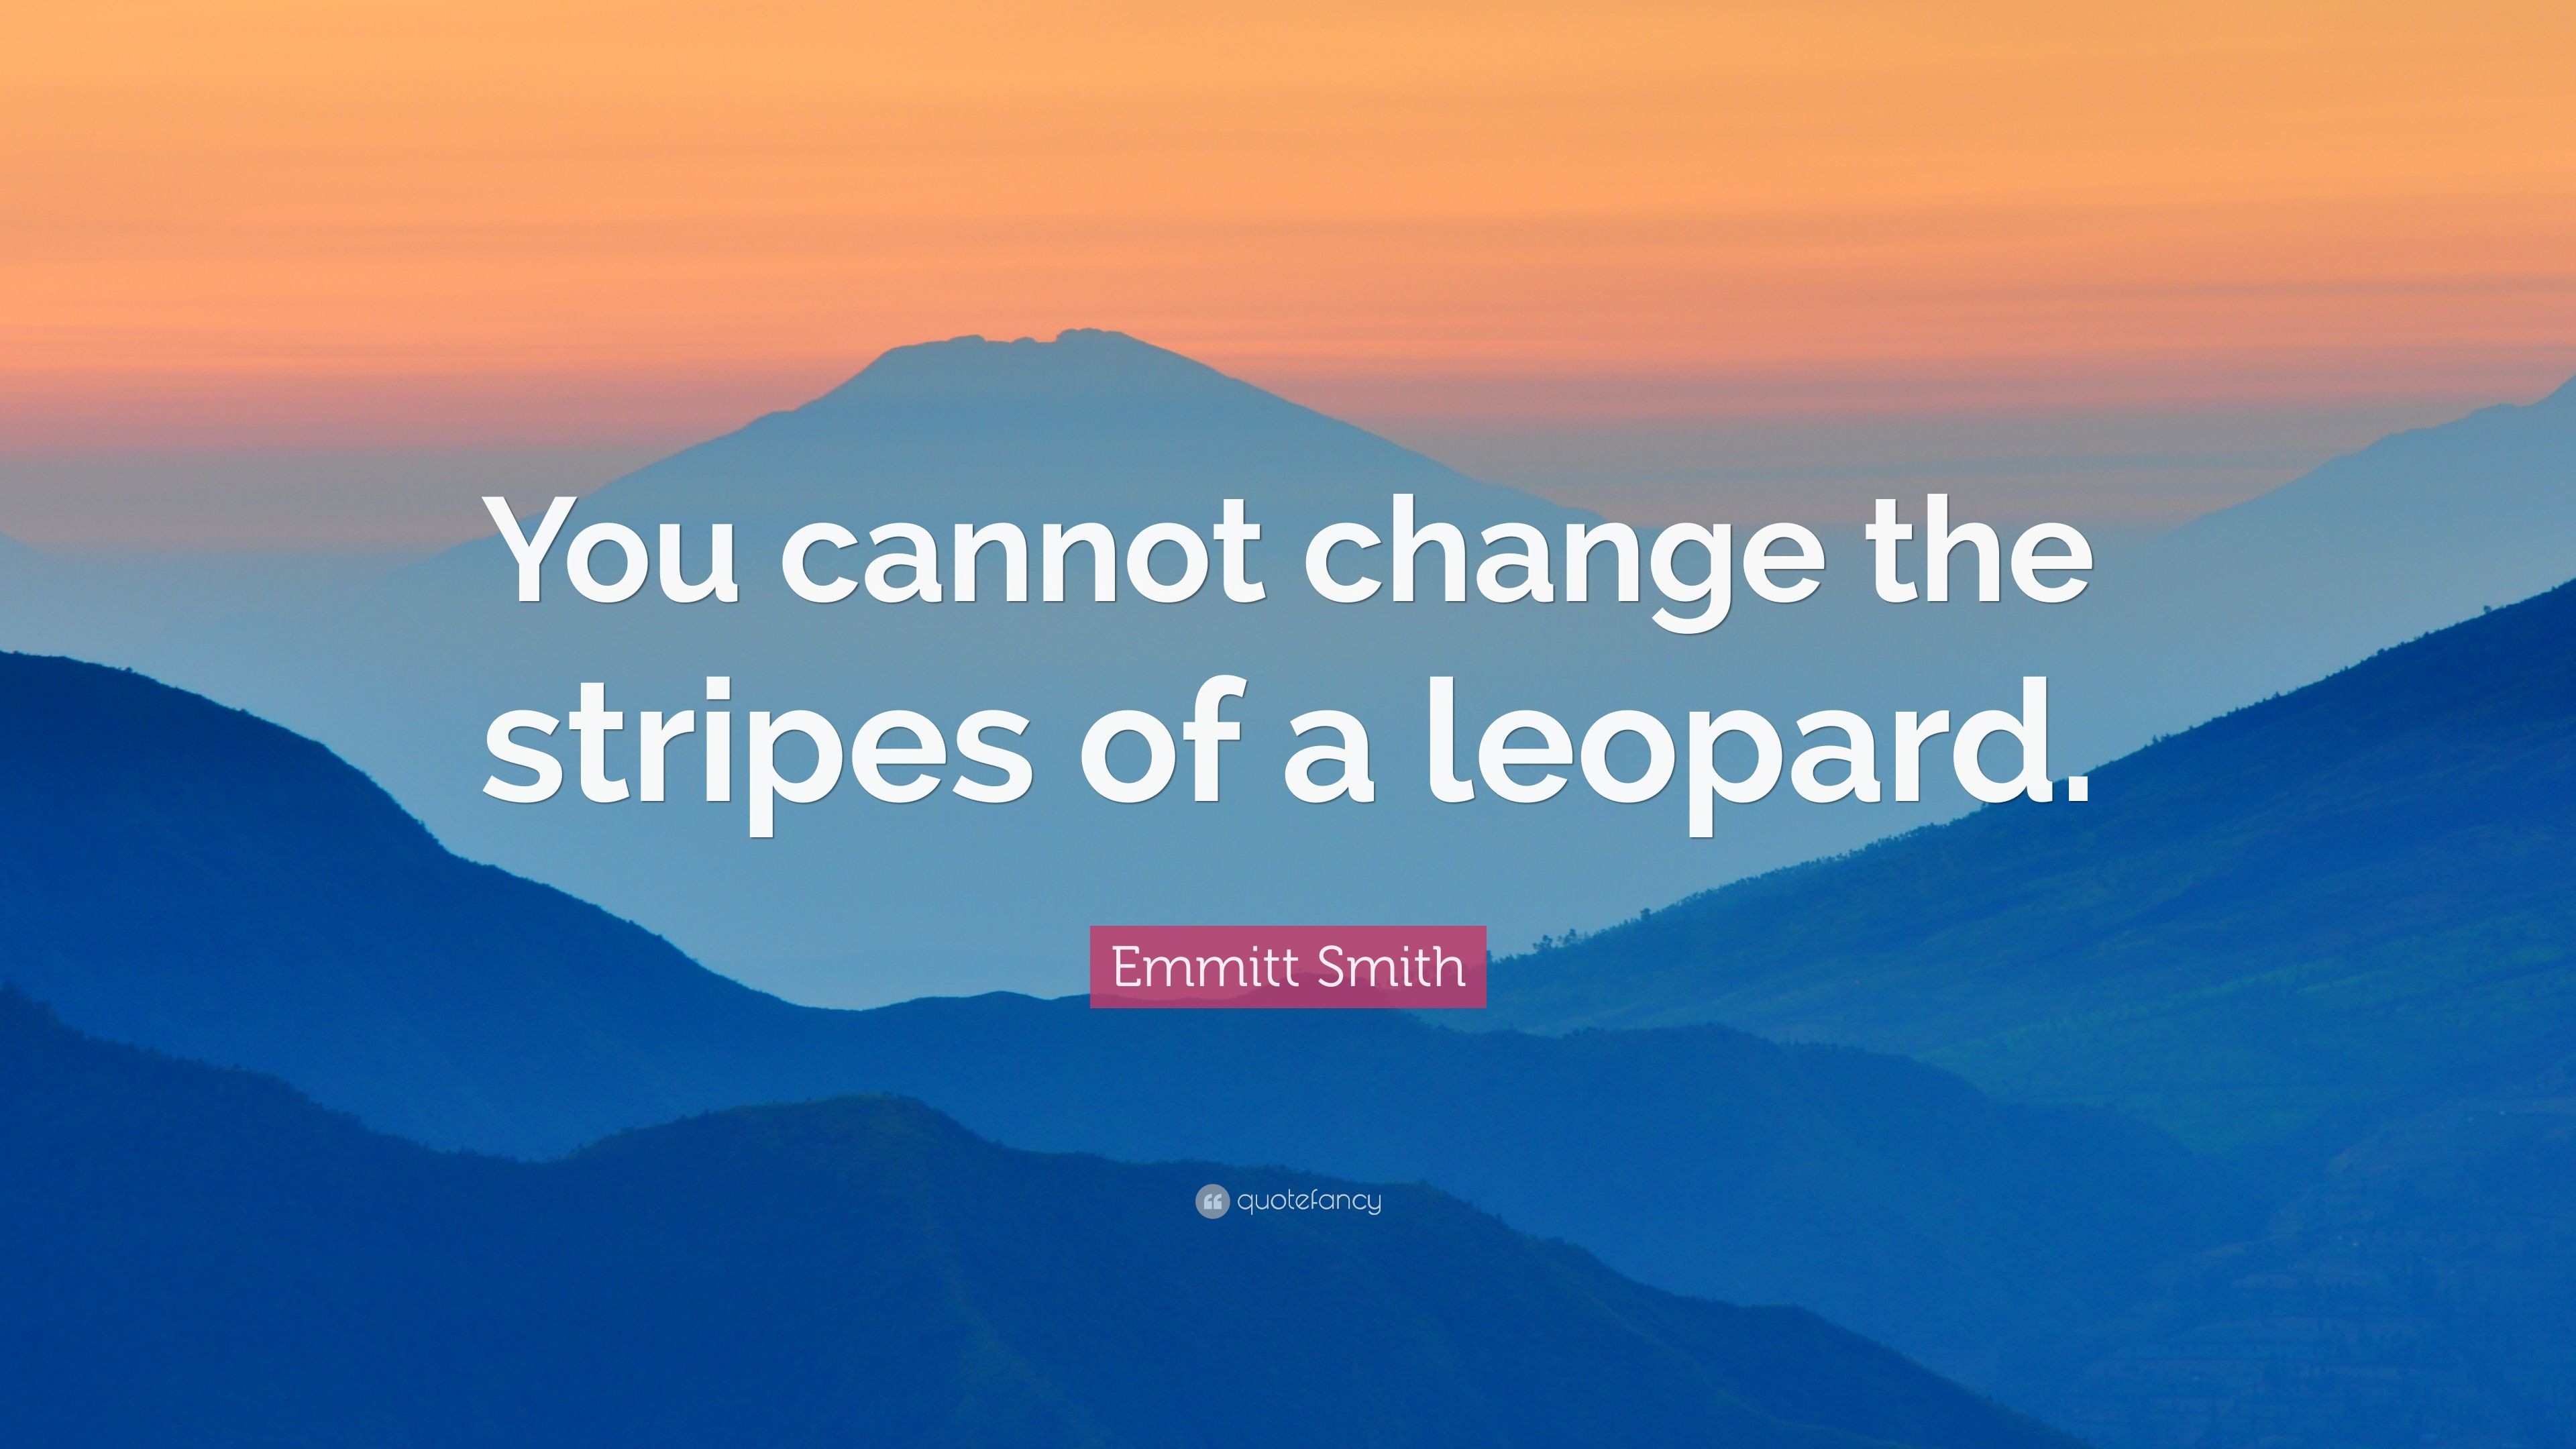 3840x2160 Emmitt Smith Quote: “You cannot change the stripes of a leopard.”